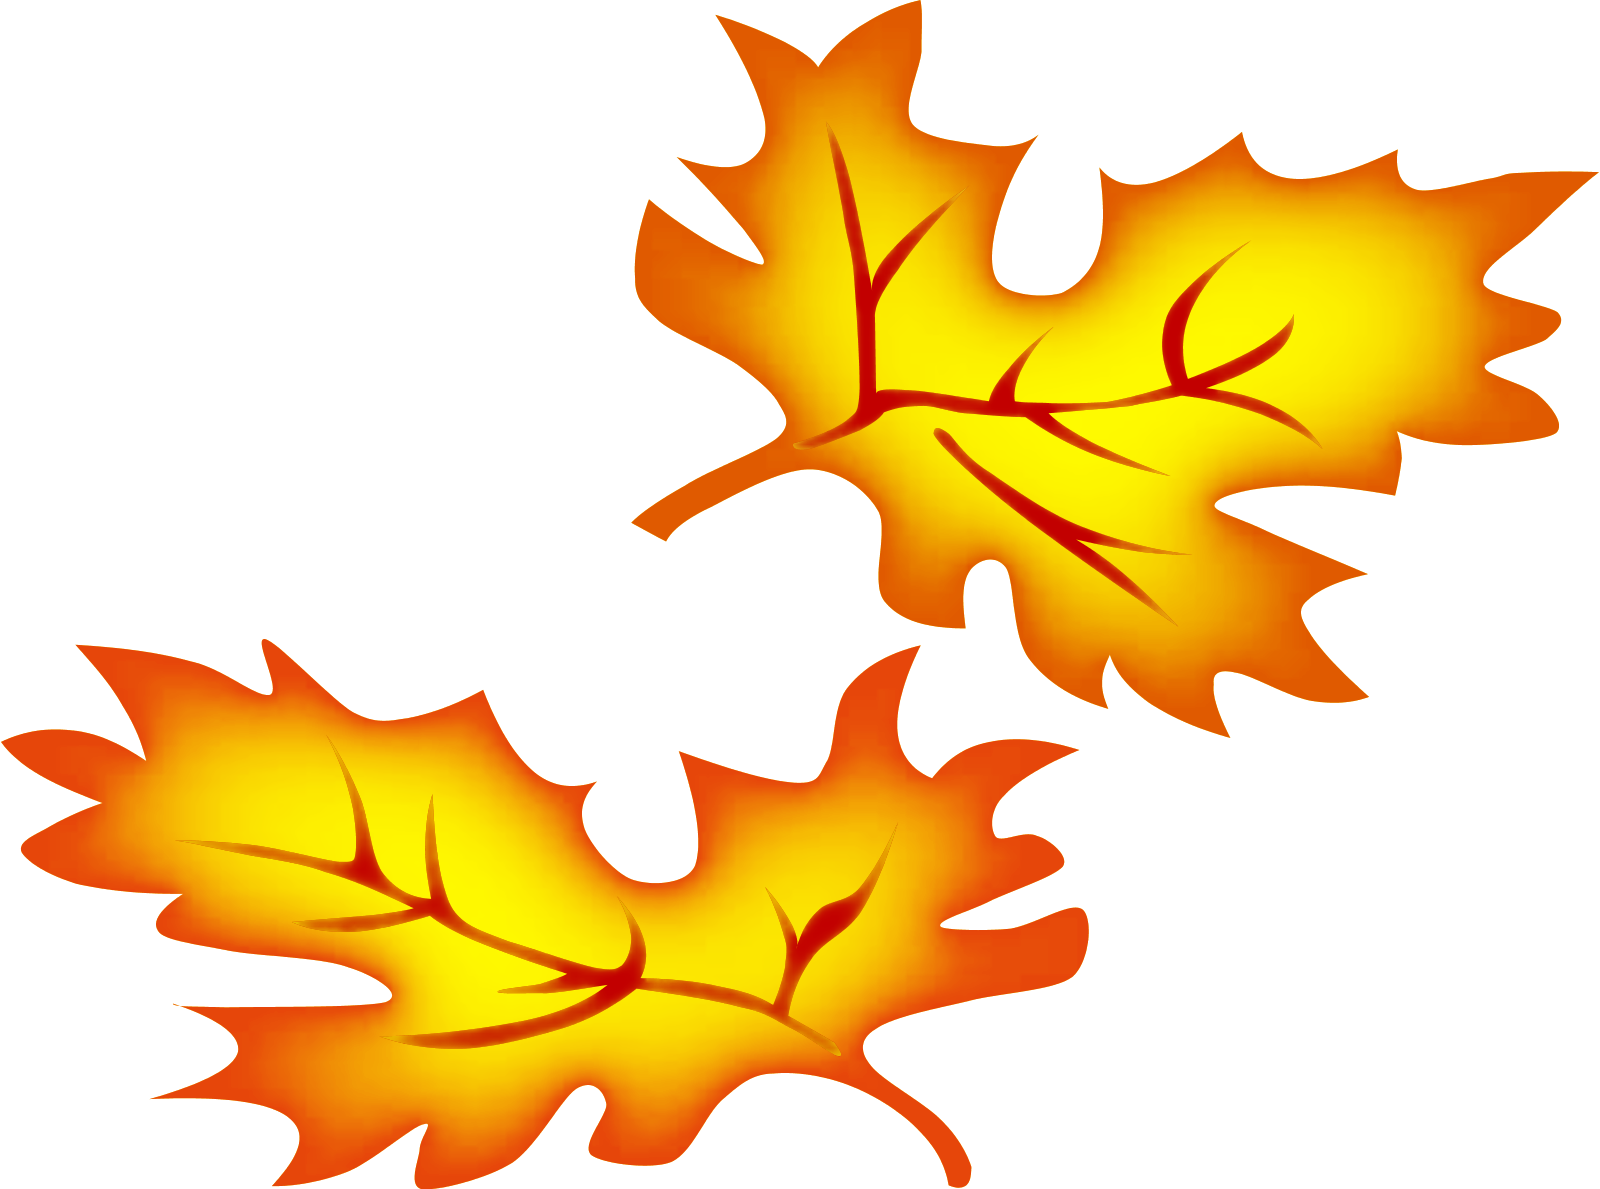 Falling leaves clipart free